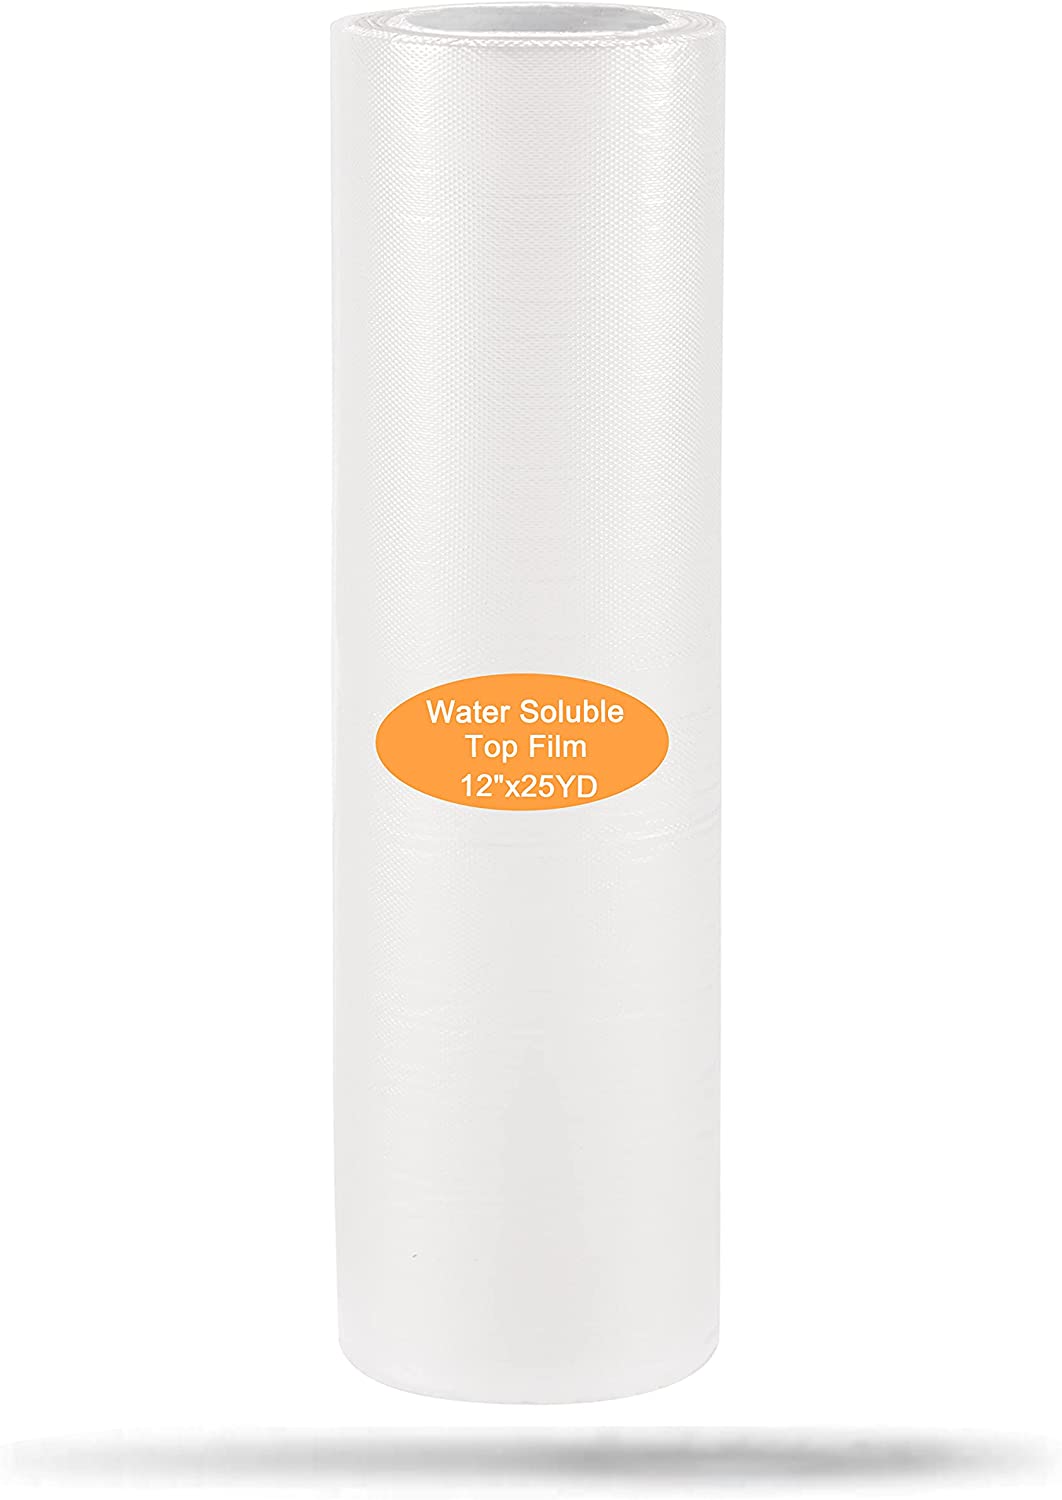 New brothread Light Weight Clear Wash Away - Water Soluble Embroidery Topping Film - 12" x 25 Yd roll